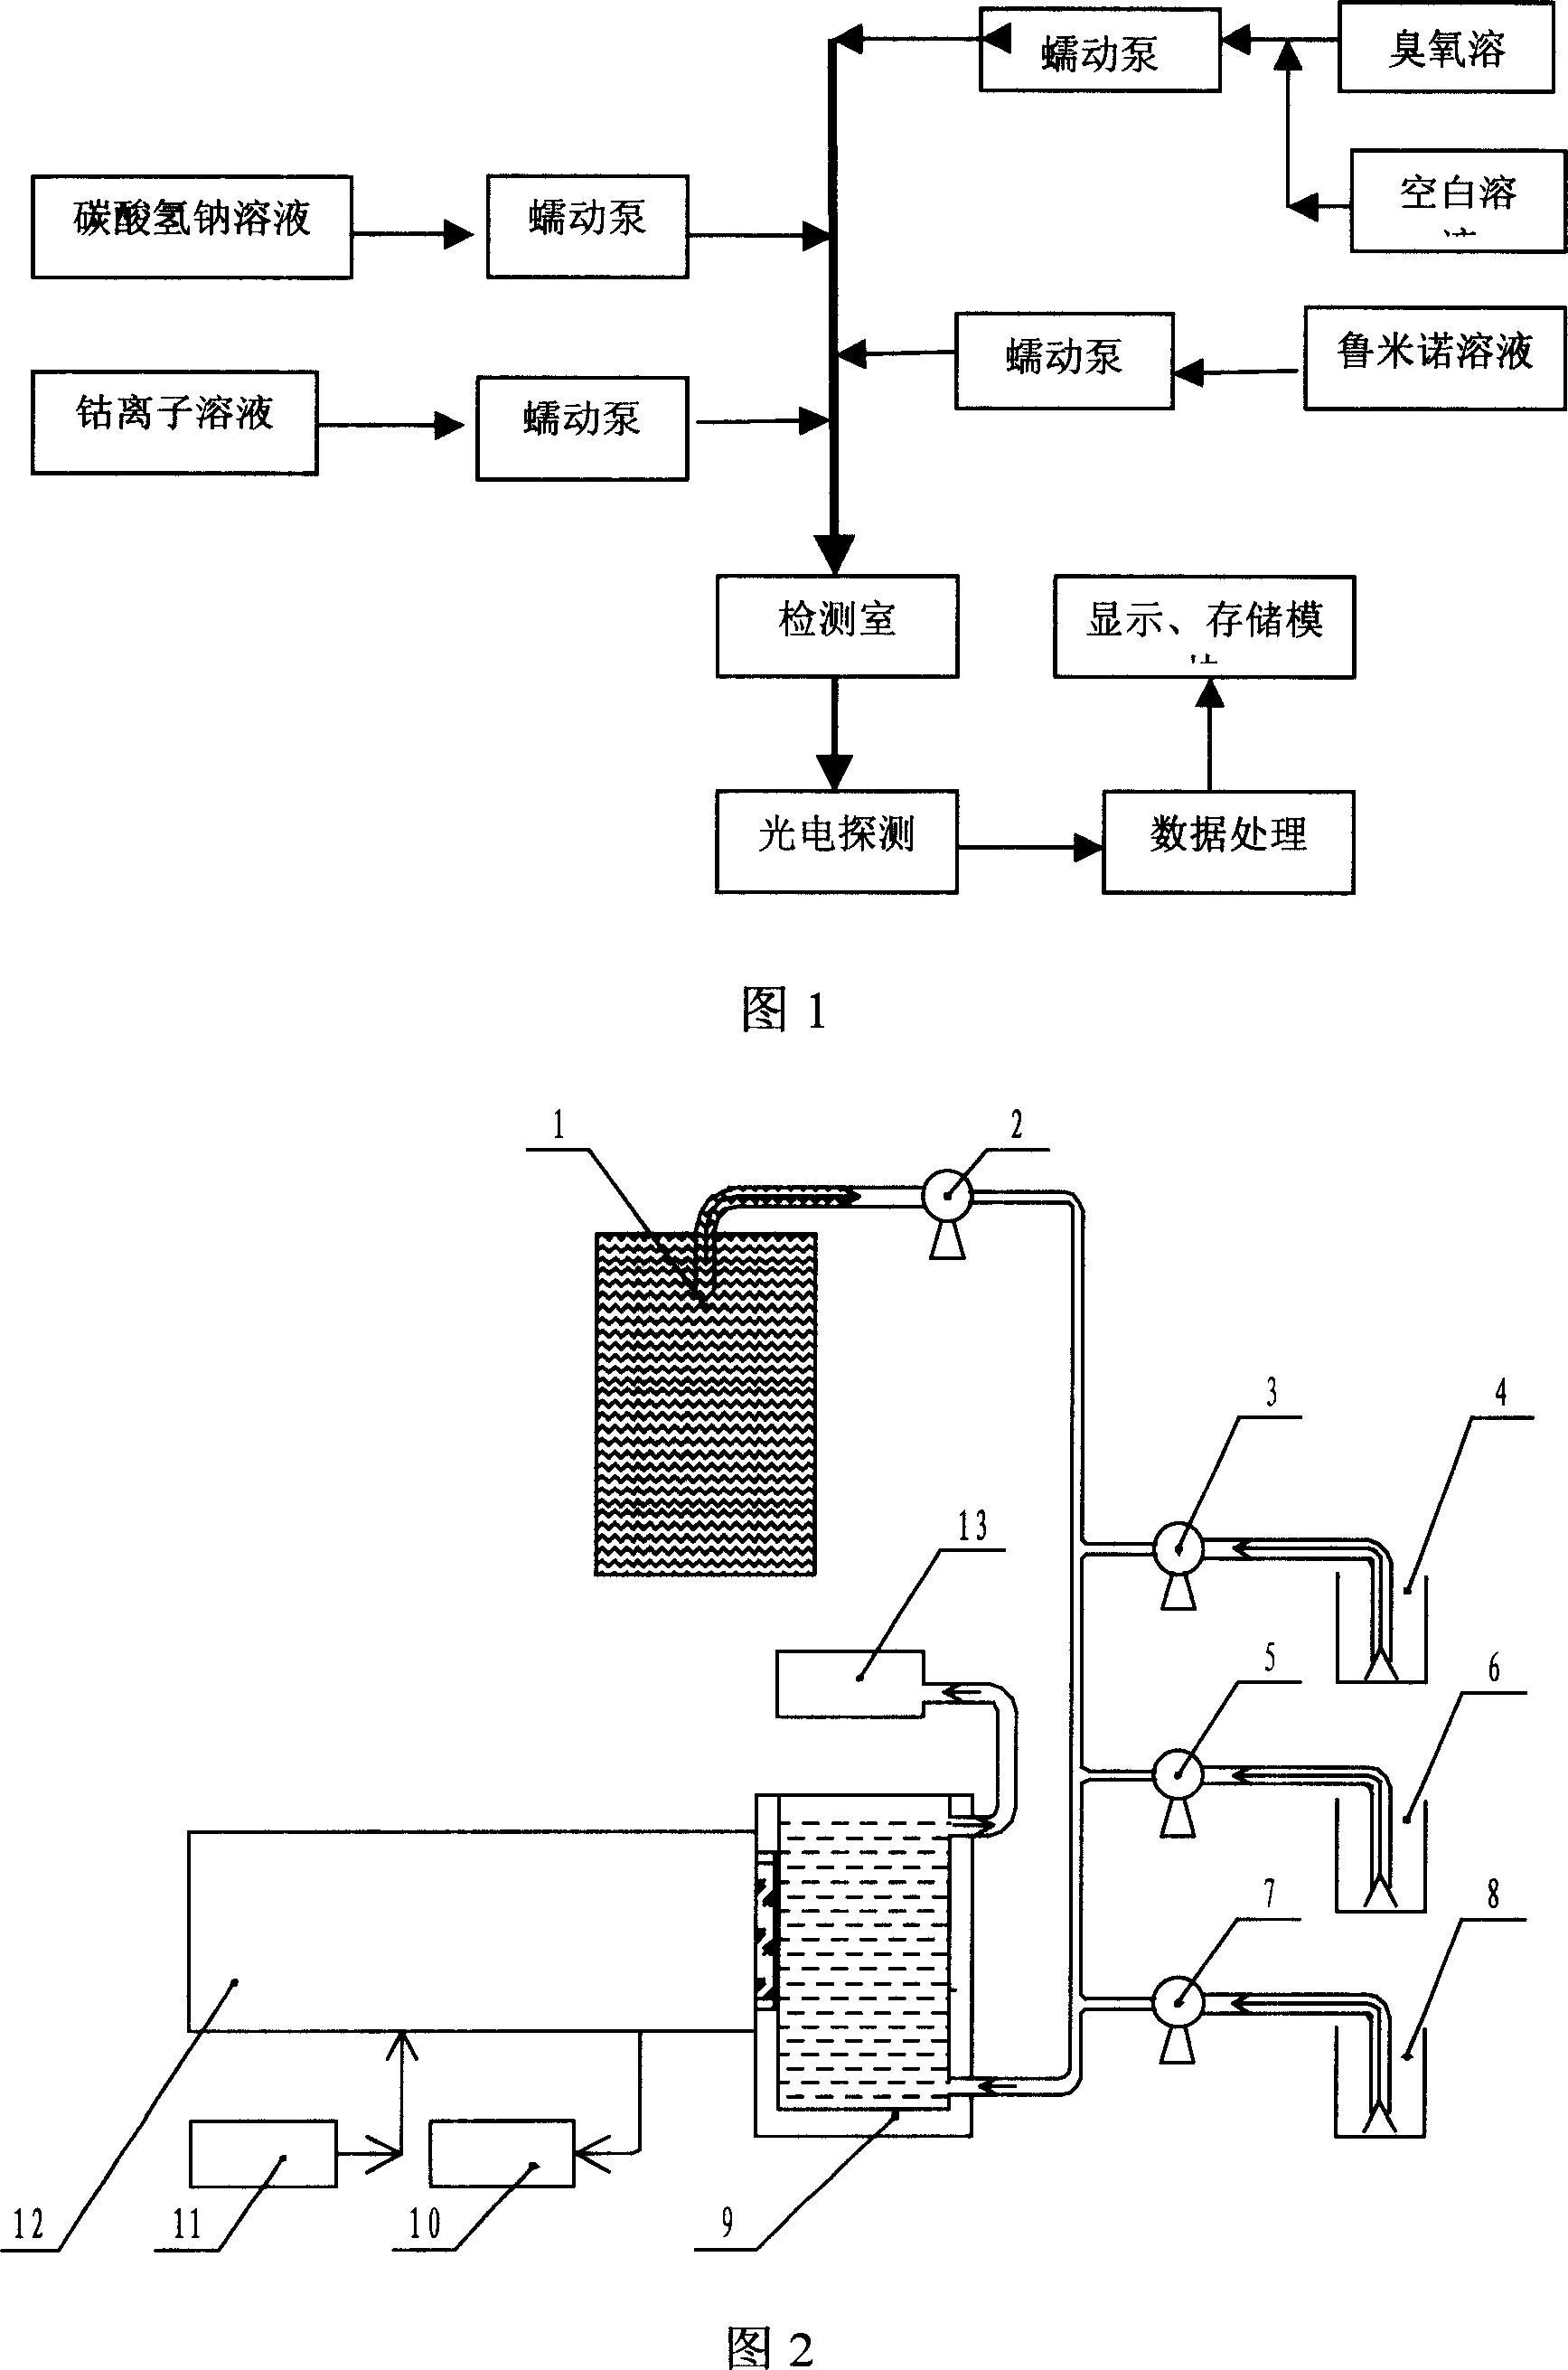 Method for measuring concentration of liquid phase ozone by mode of oxidizing floating injected ozone